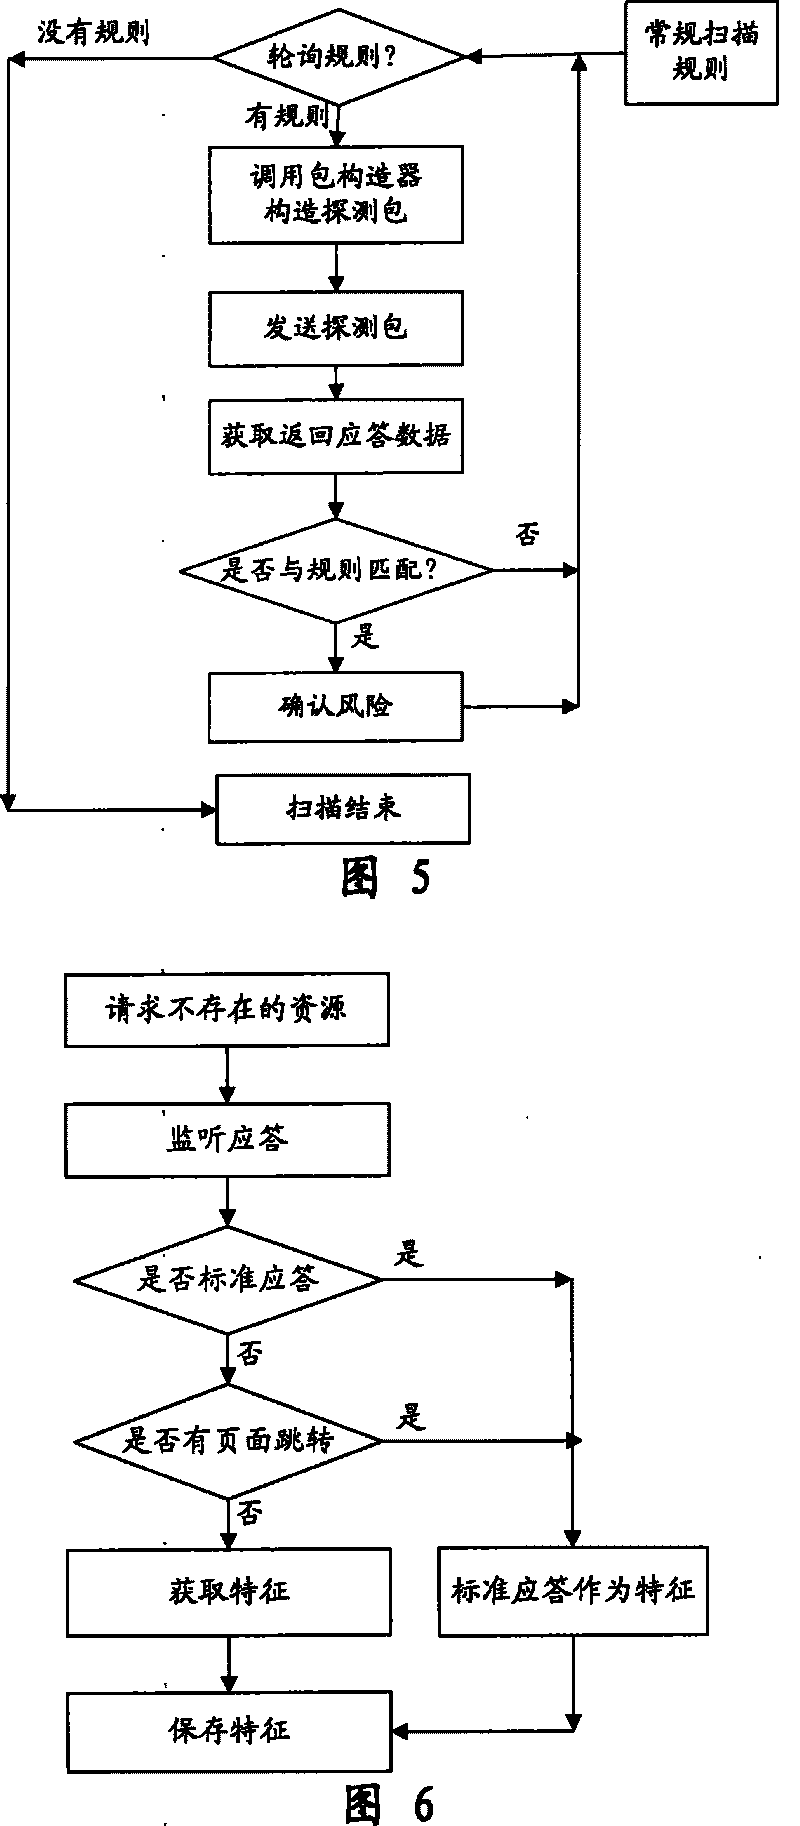 Automatic penetration testing system and method for WEB system